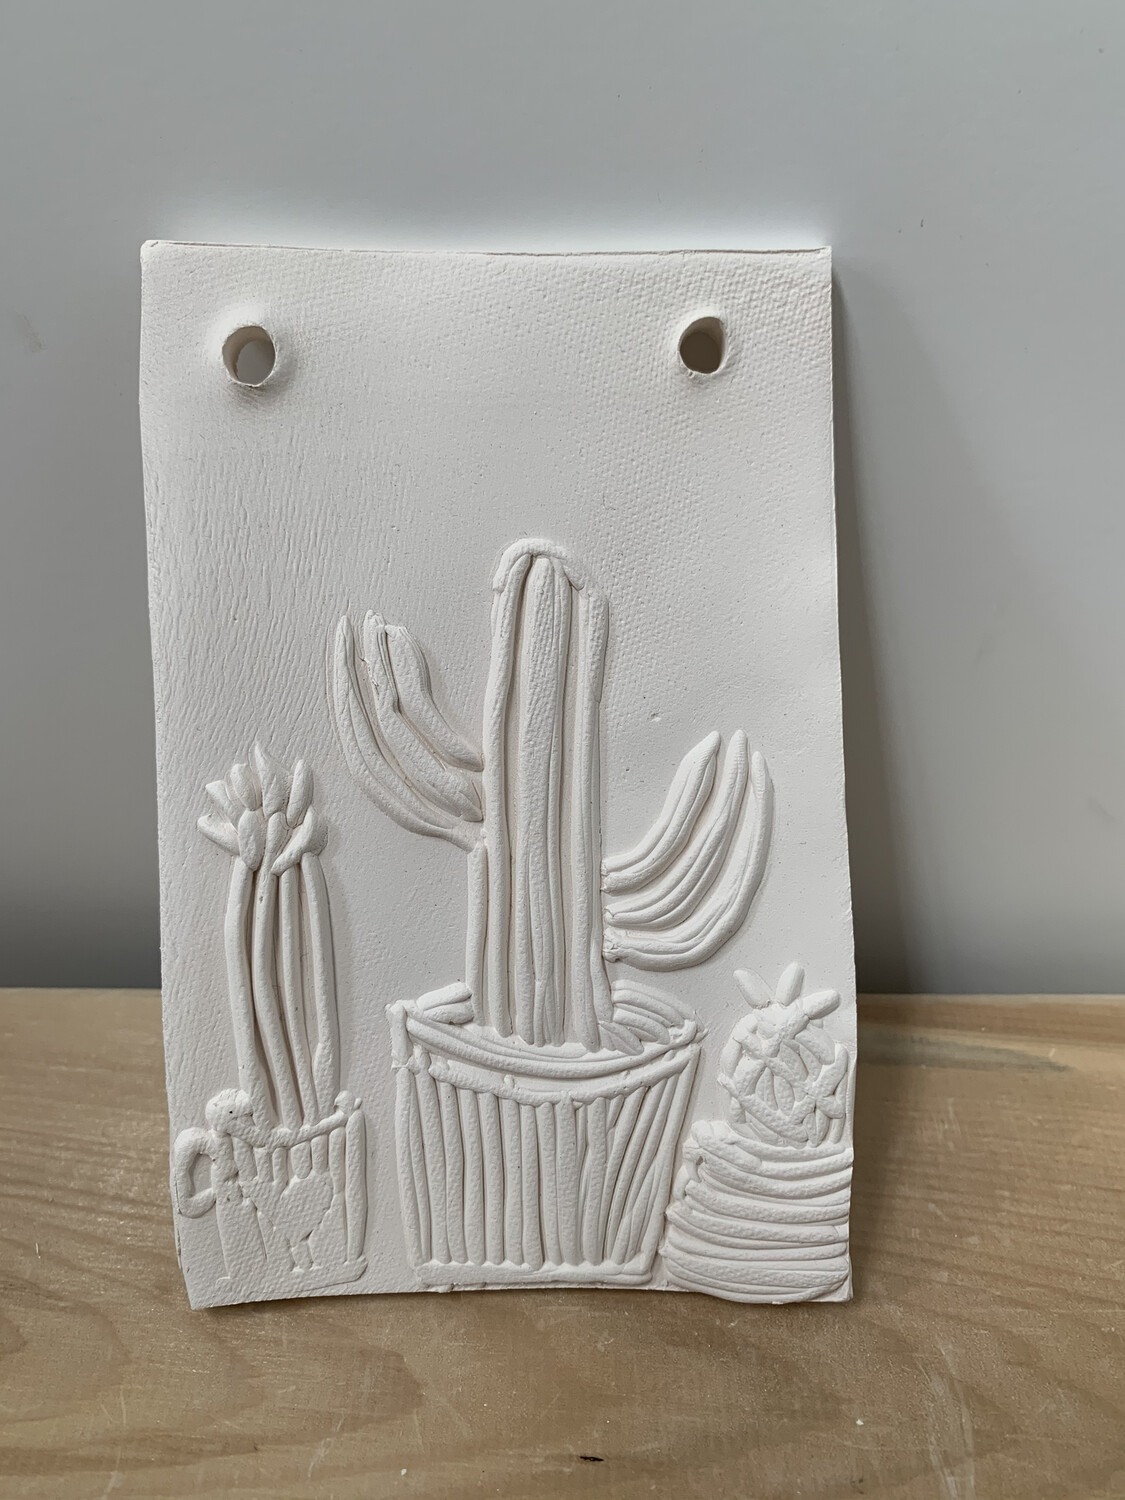 Paint Your Own Pottery - Ceramic
Lookin’ Sharp Cactus Tile Painting Kit